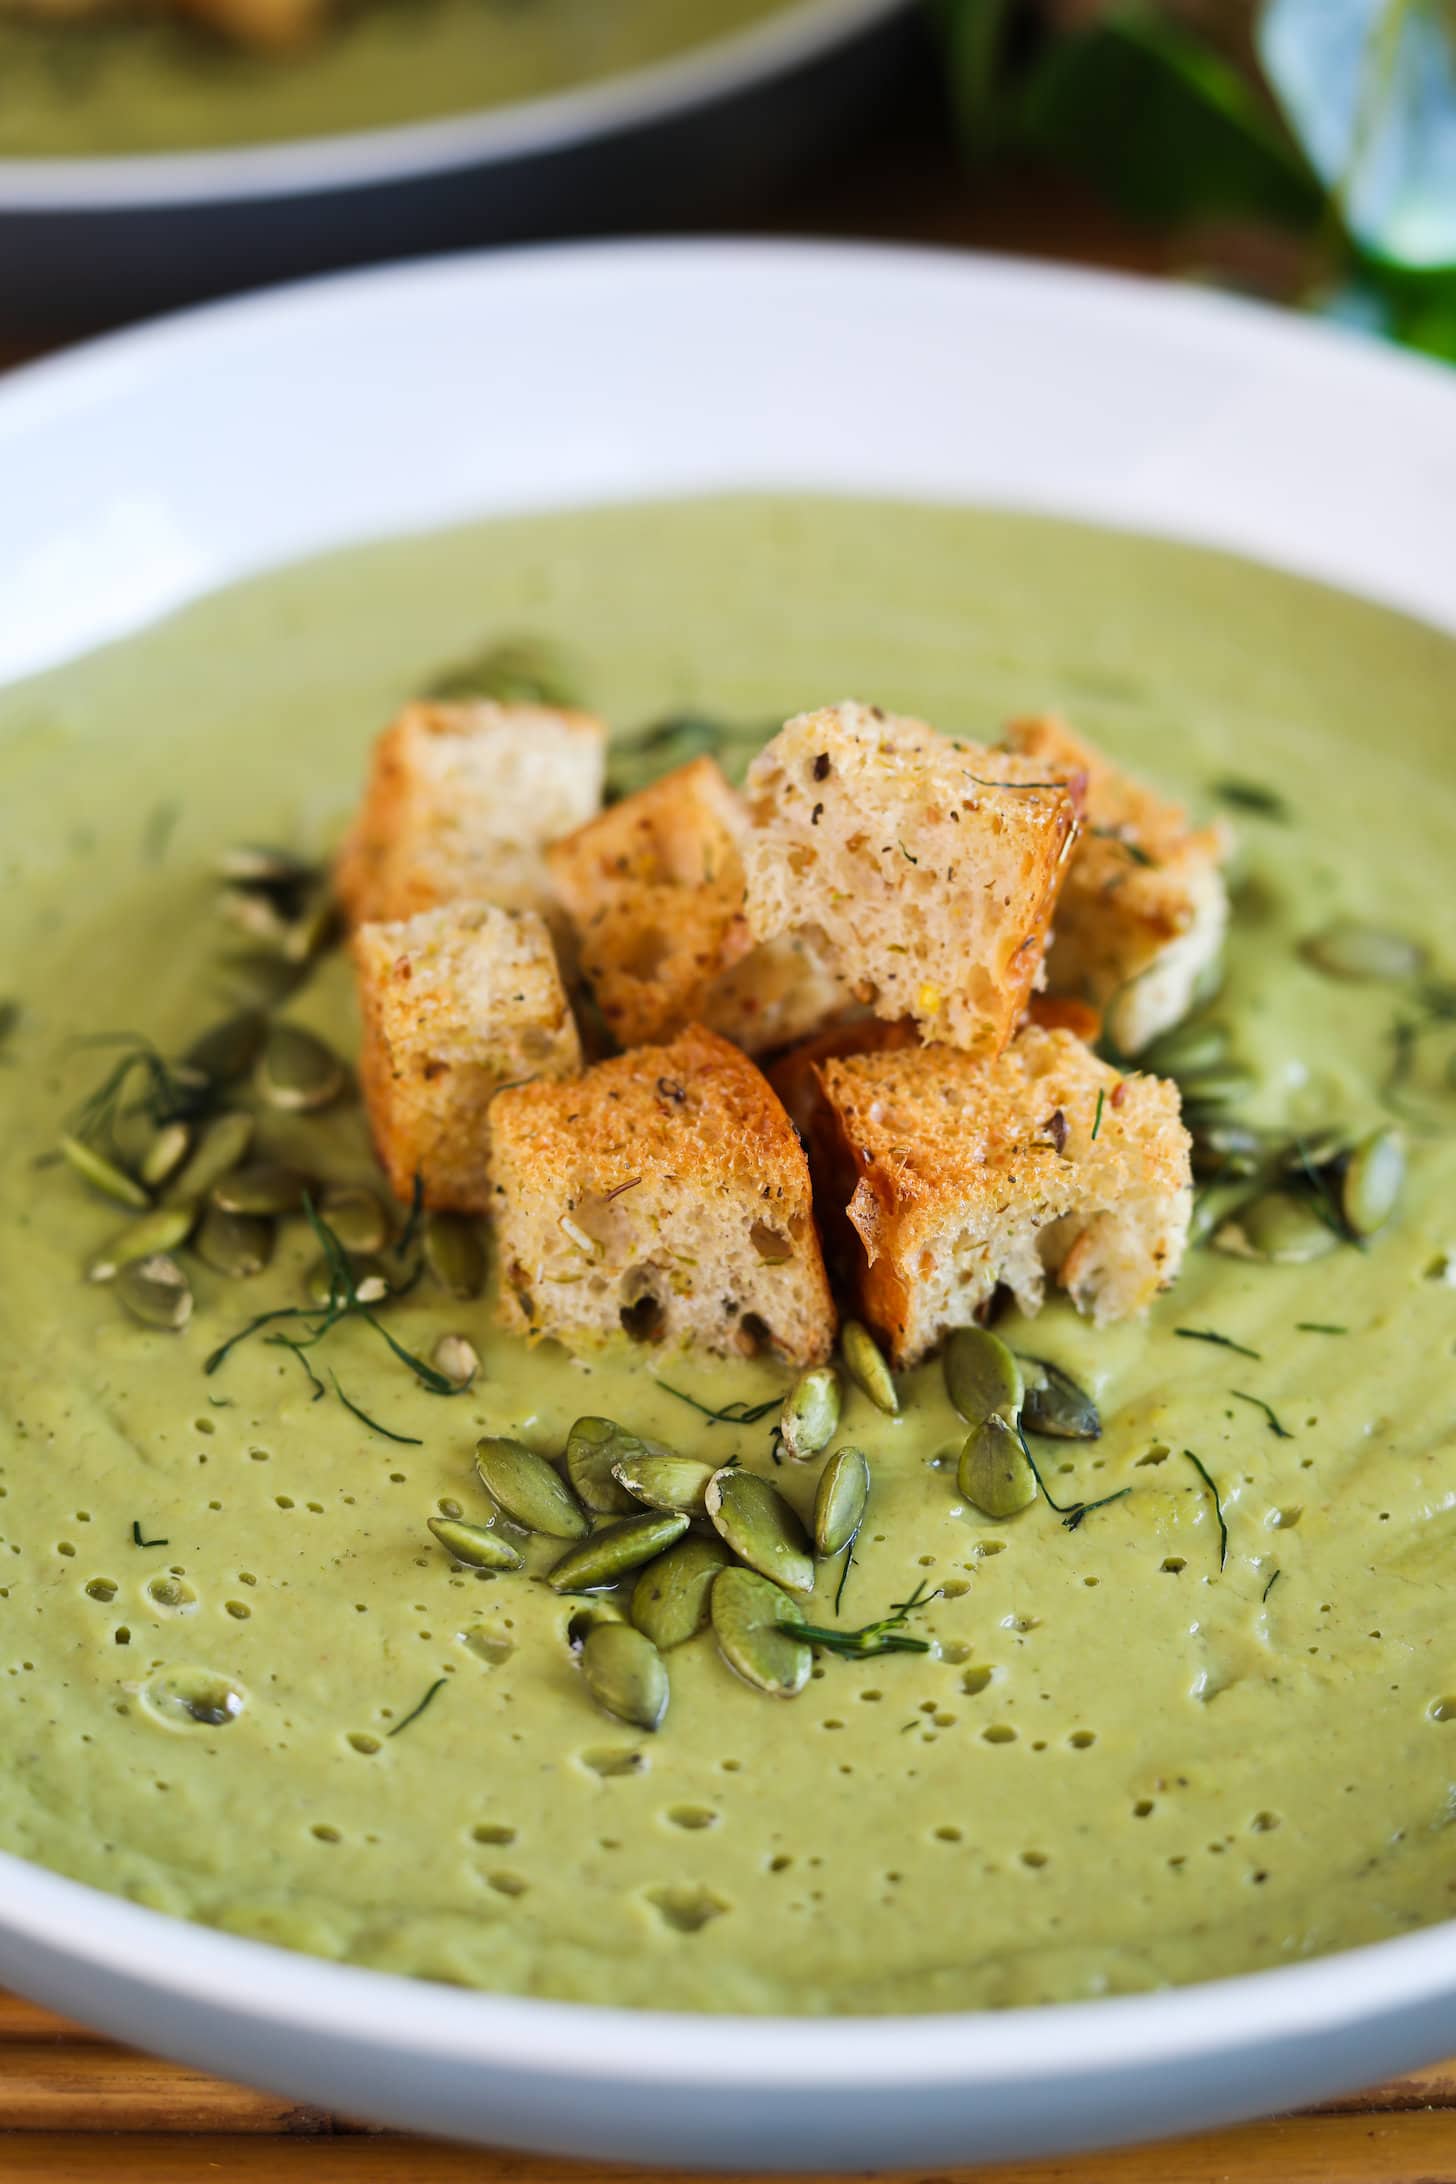 Angled perspective image of a bowl of green soup topped with croutons, seeds and herbs.